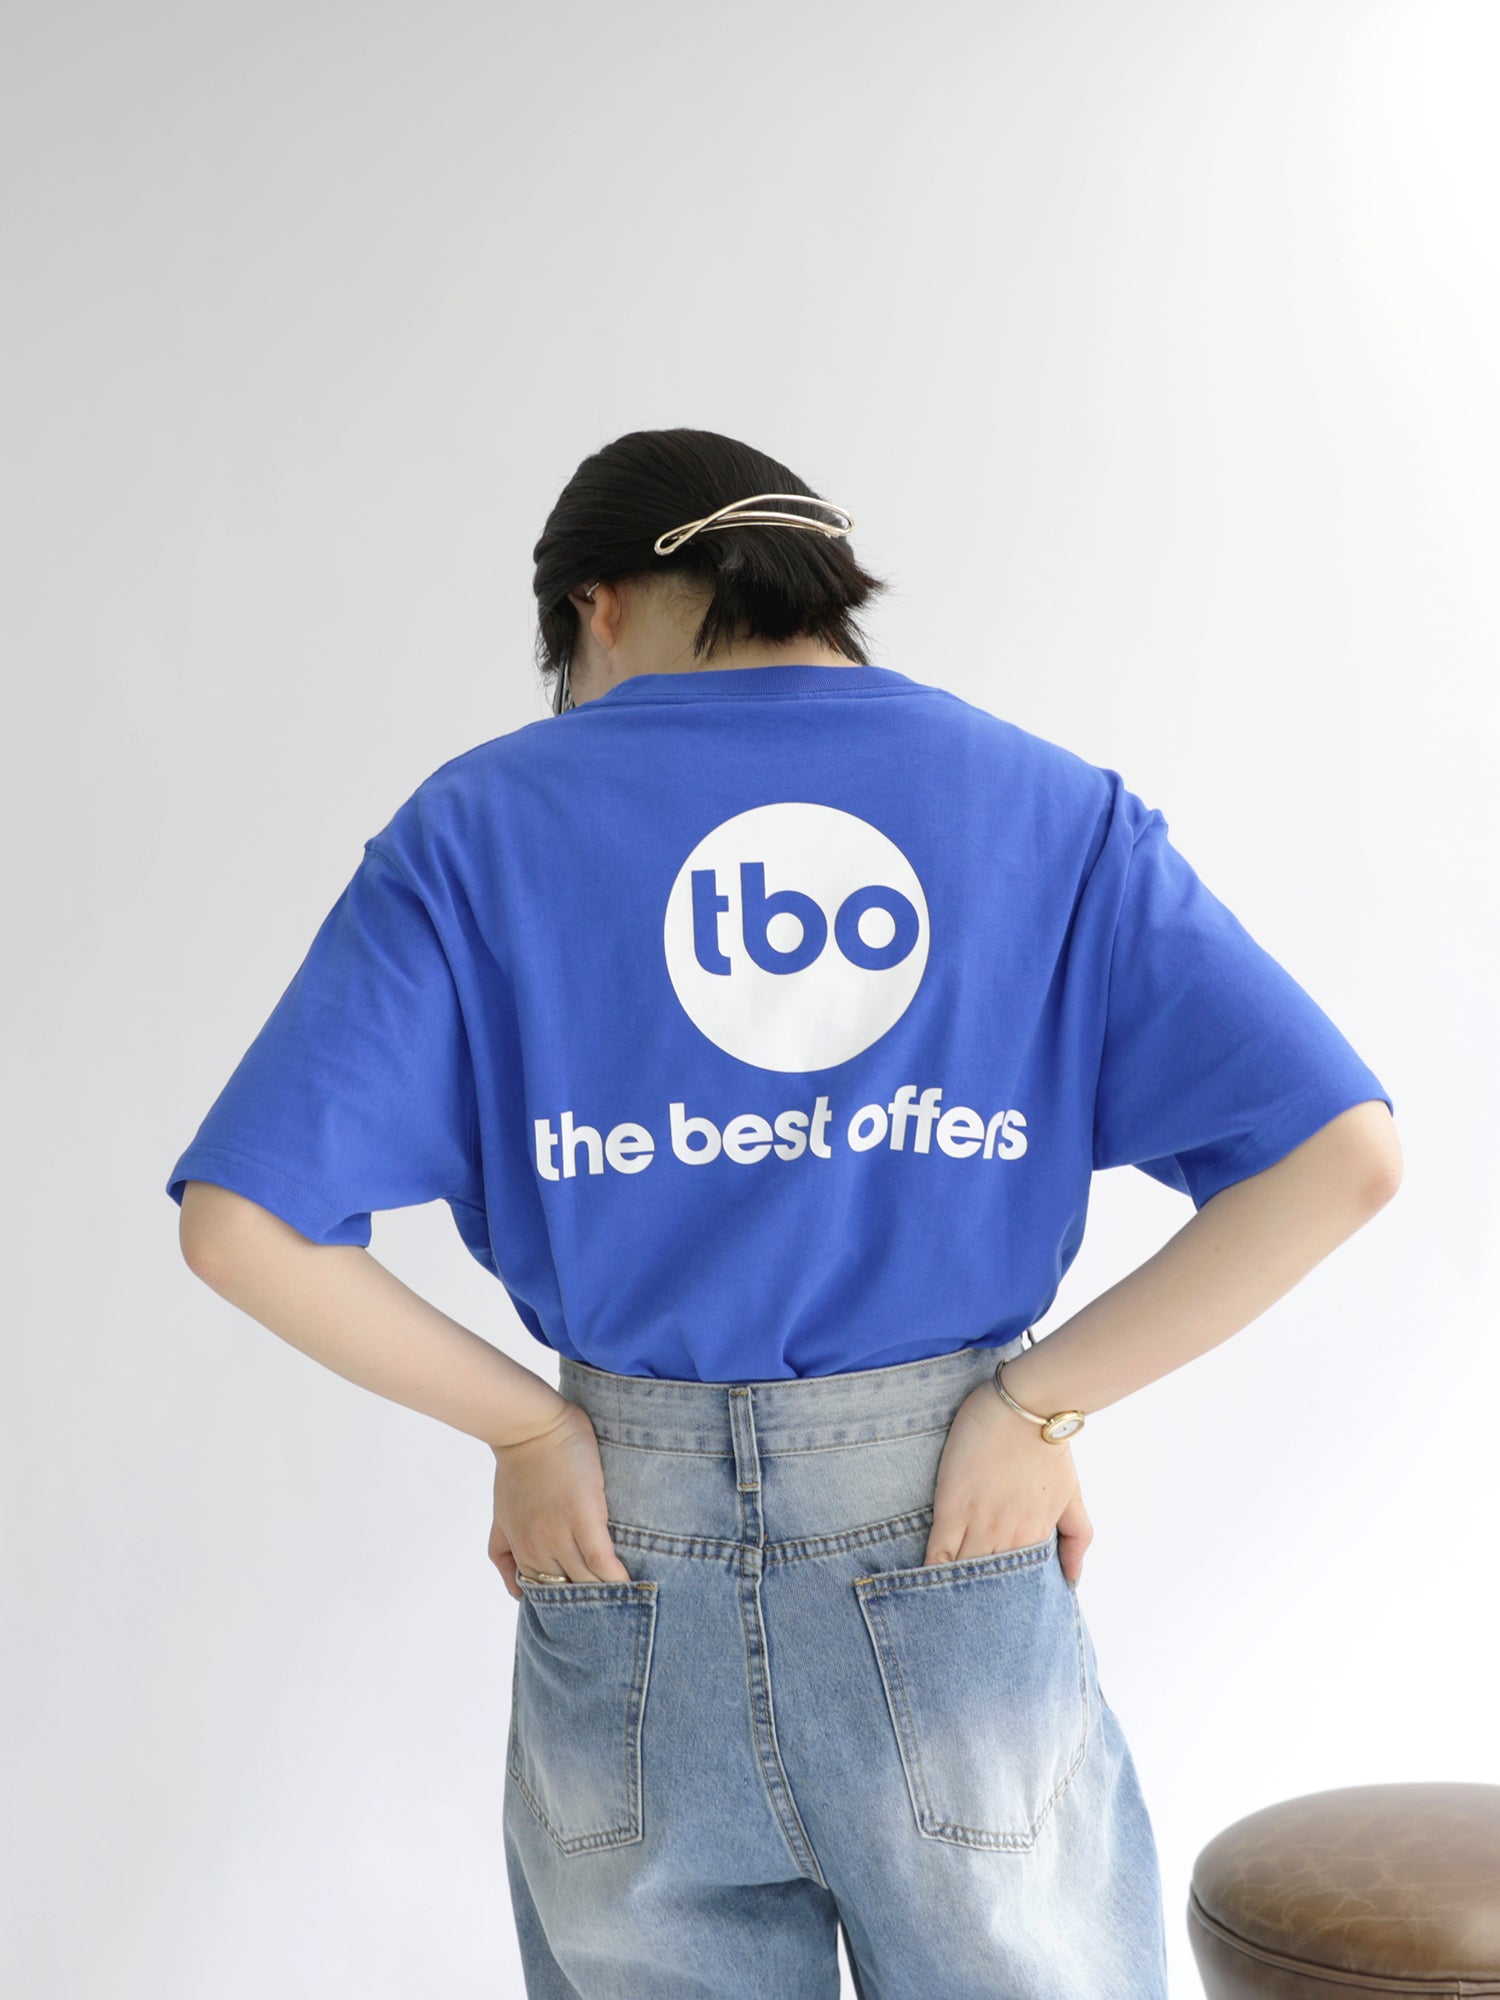 the best offers "tbo LOGO" 8.1oz TEE